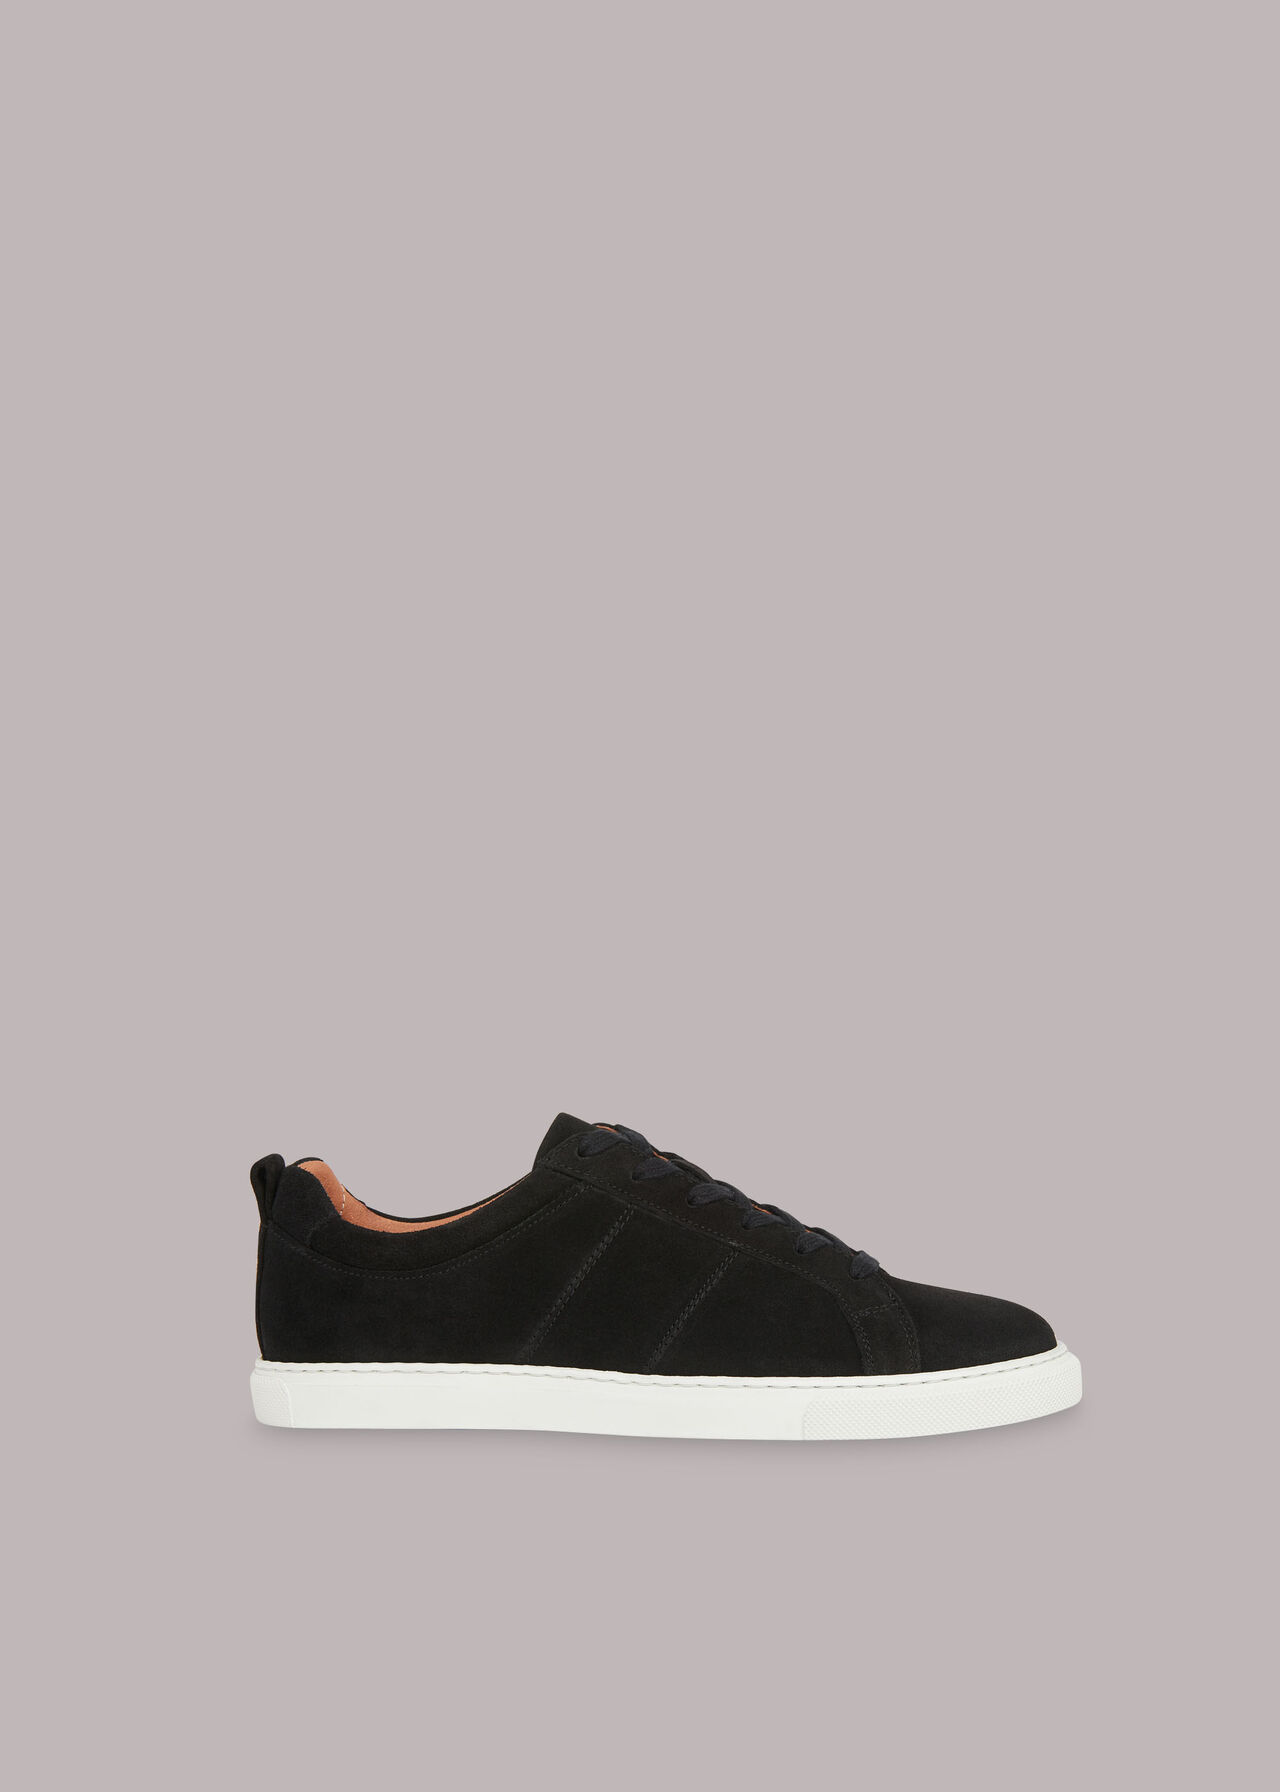 Koki Suede Lace Up Trainer Black